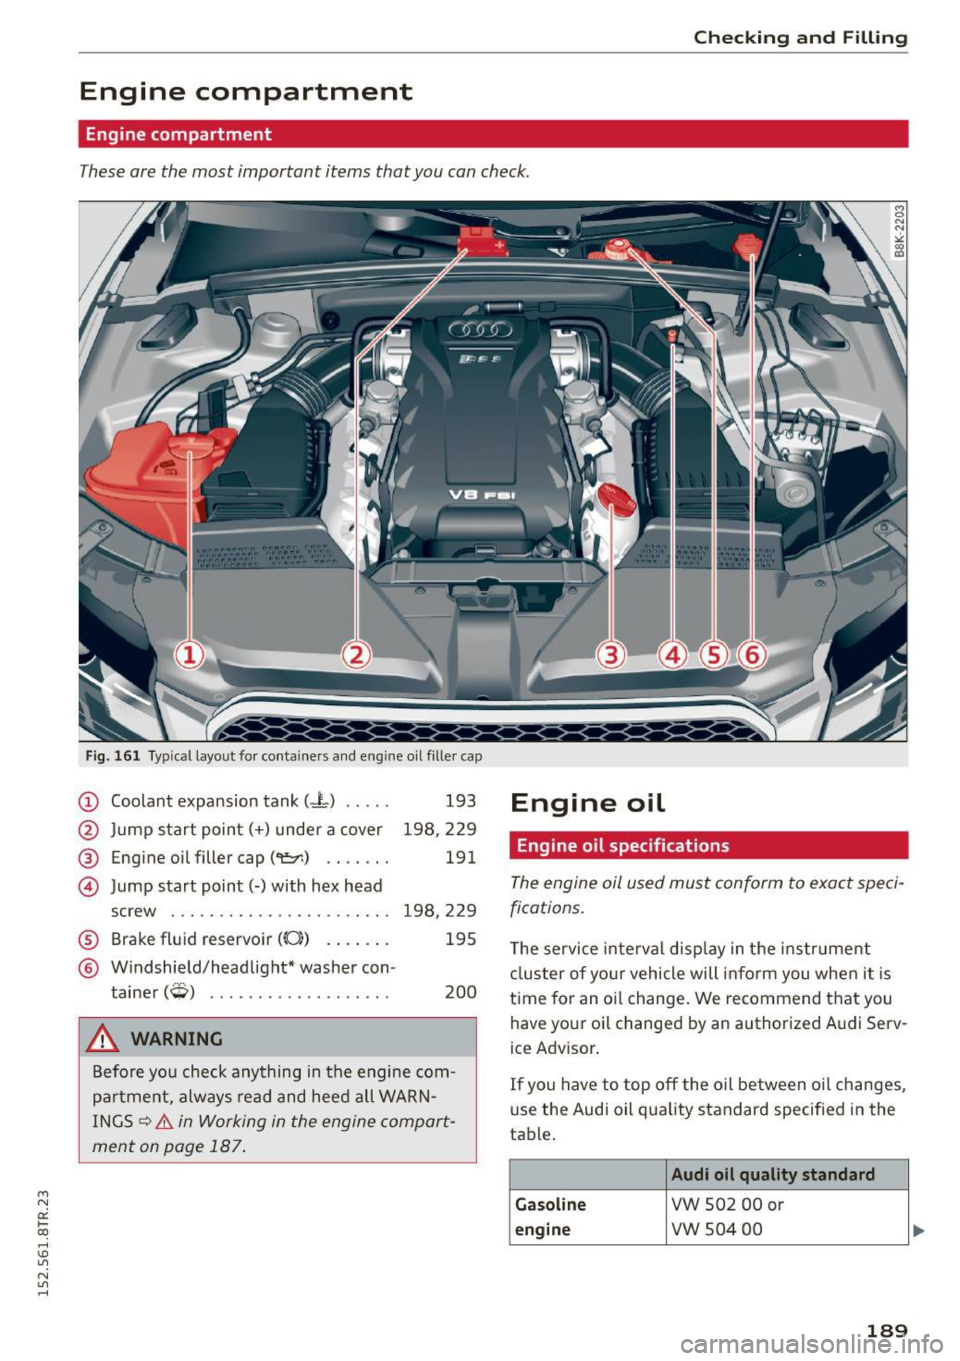 AUDI RS5 COUPE 2015  Owners Manual " N 
0:: I-­co 
rl I.O 
" N 
" rl 
Check in g  and  Fillin g 
Engine  compartment 
Engine  compartment 
These are the  most  important  items  that you  can check. 
Fig. 161 Typical  layout  for  